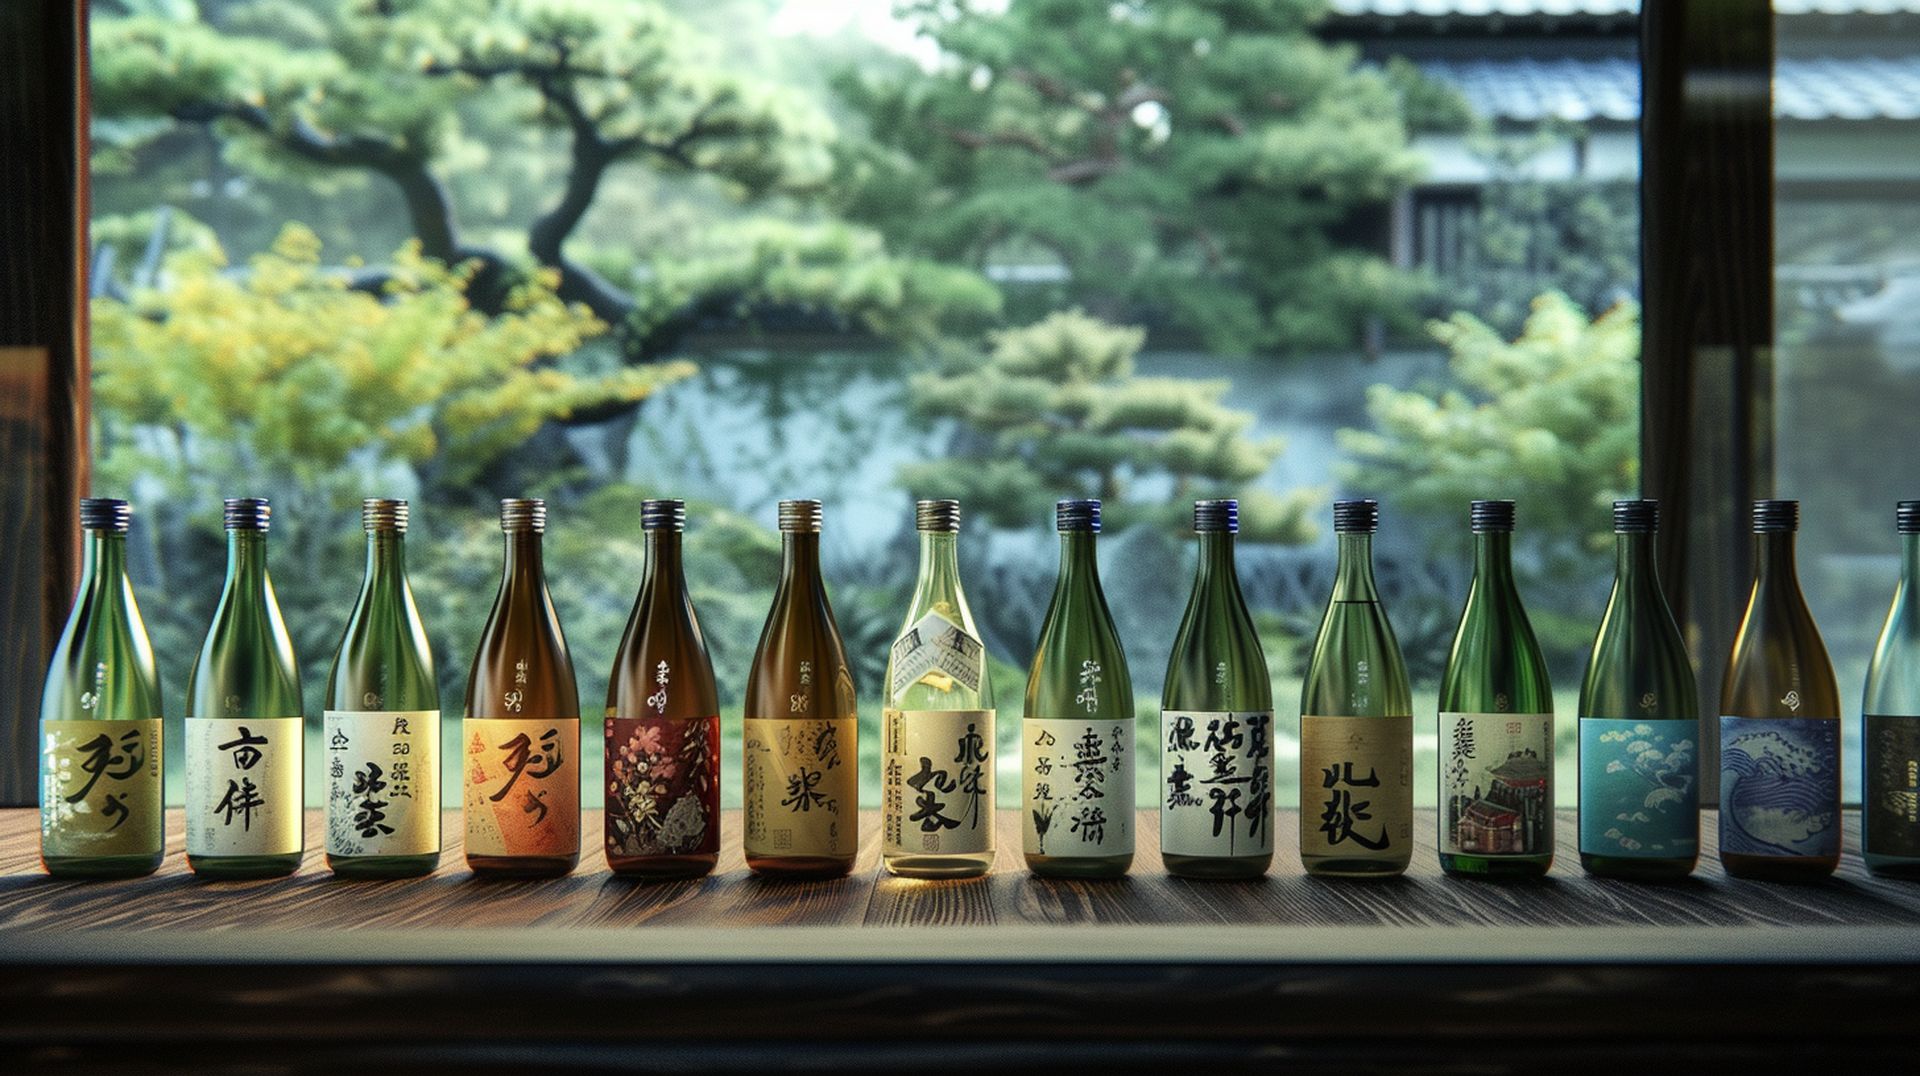 photograph of an array of Japanese rice wine bottles aligned on a traditional wooden table, with soft lighting highlighting the intricate labels and the gentle hue of the sake within. The background subtly features a serene Japanese garden to evoke a sense of tranquility and cultural heritage by Merasturda Enkeste